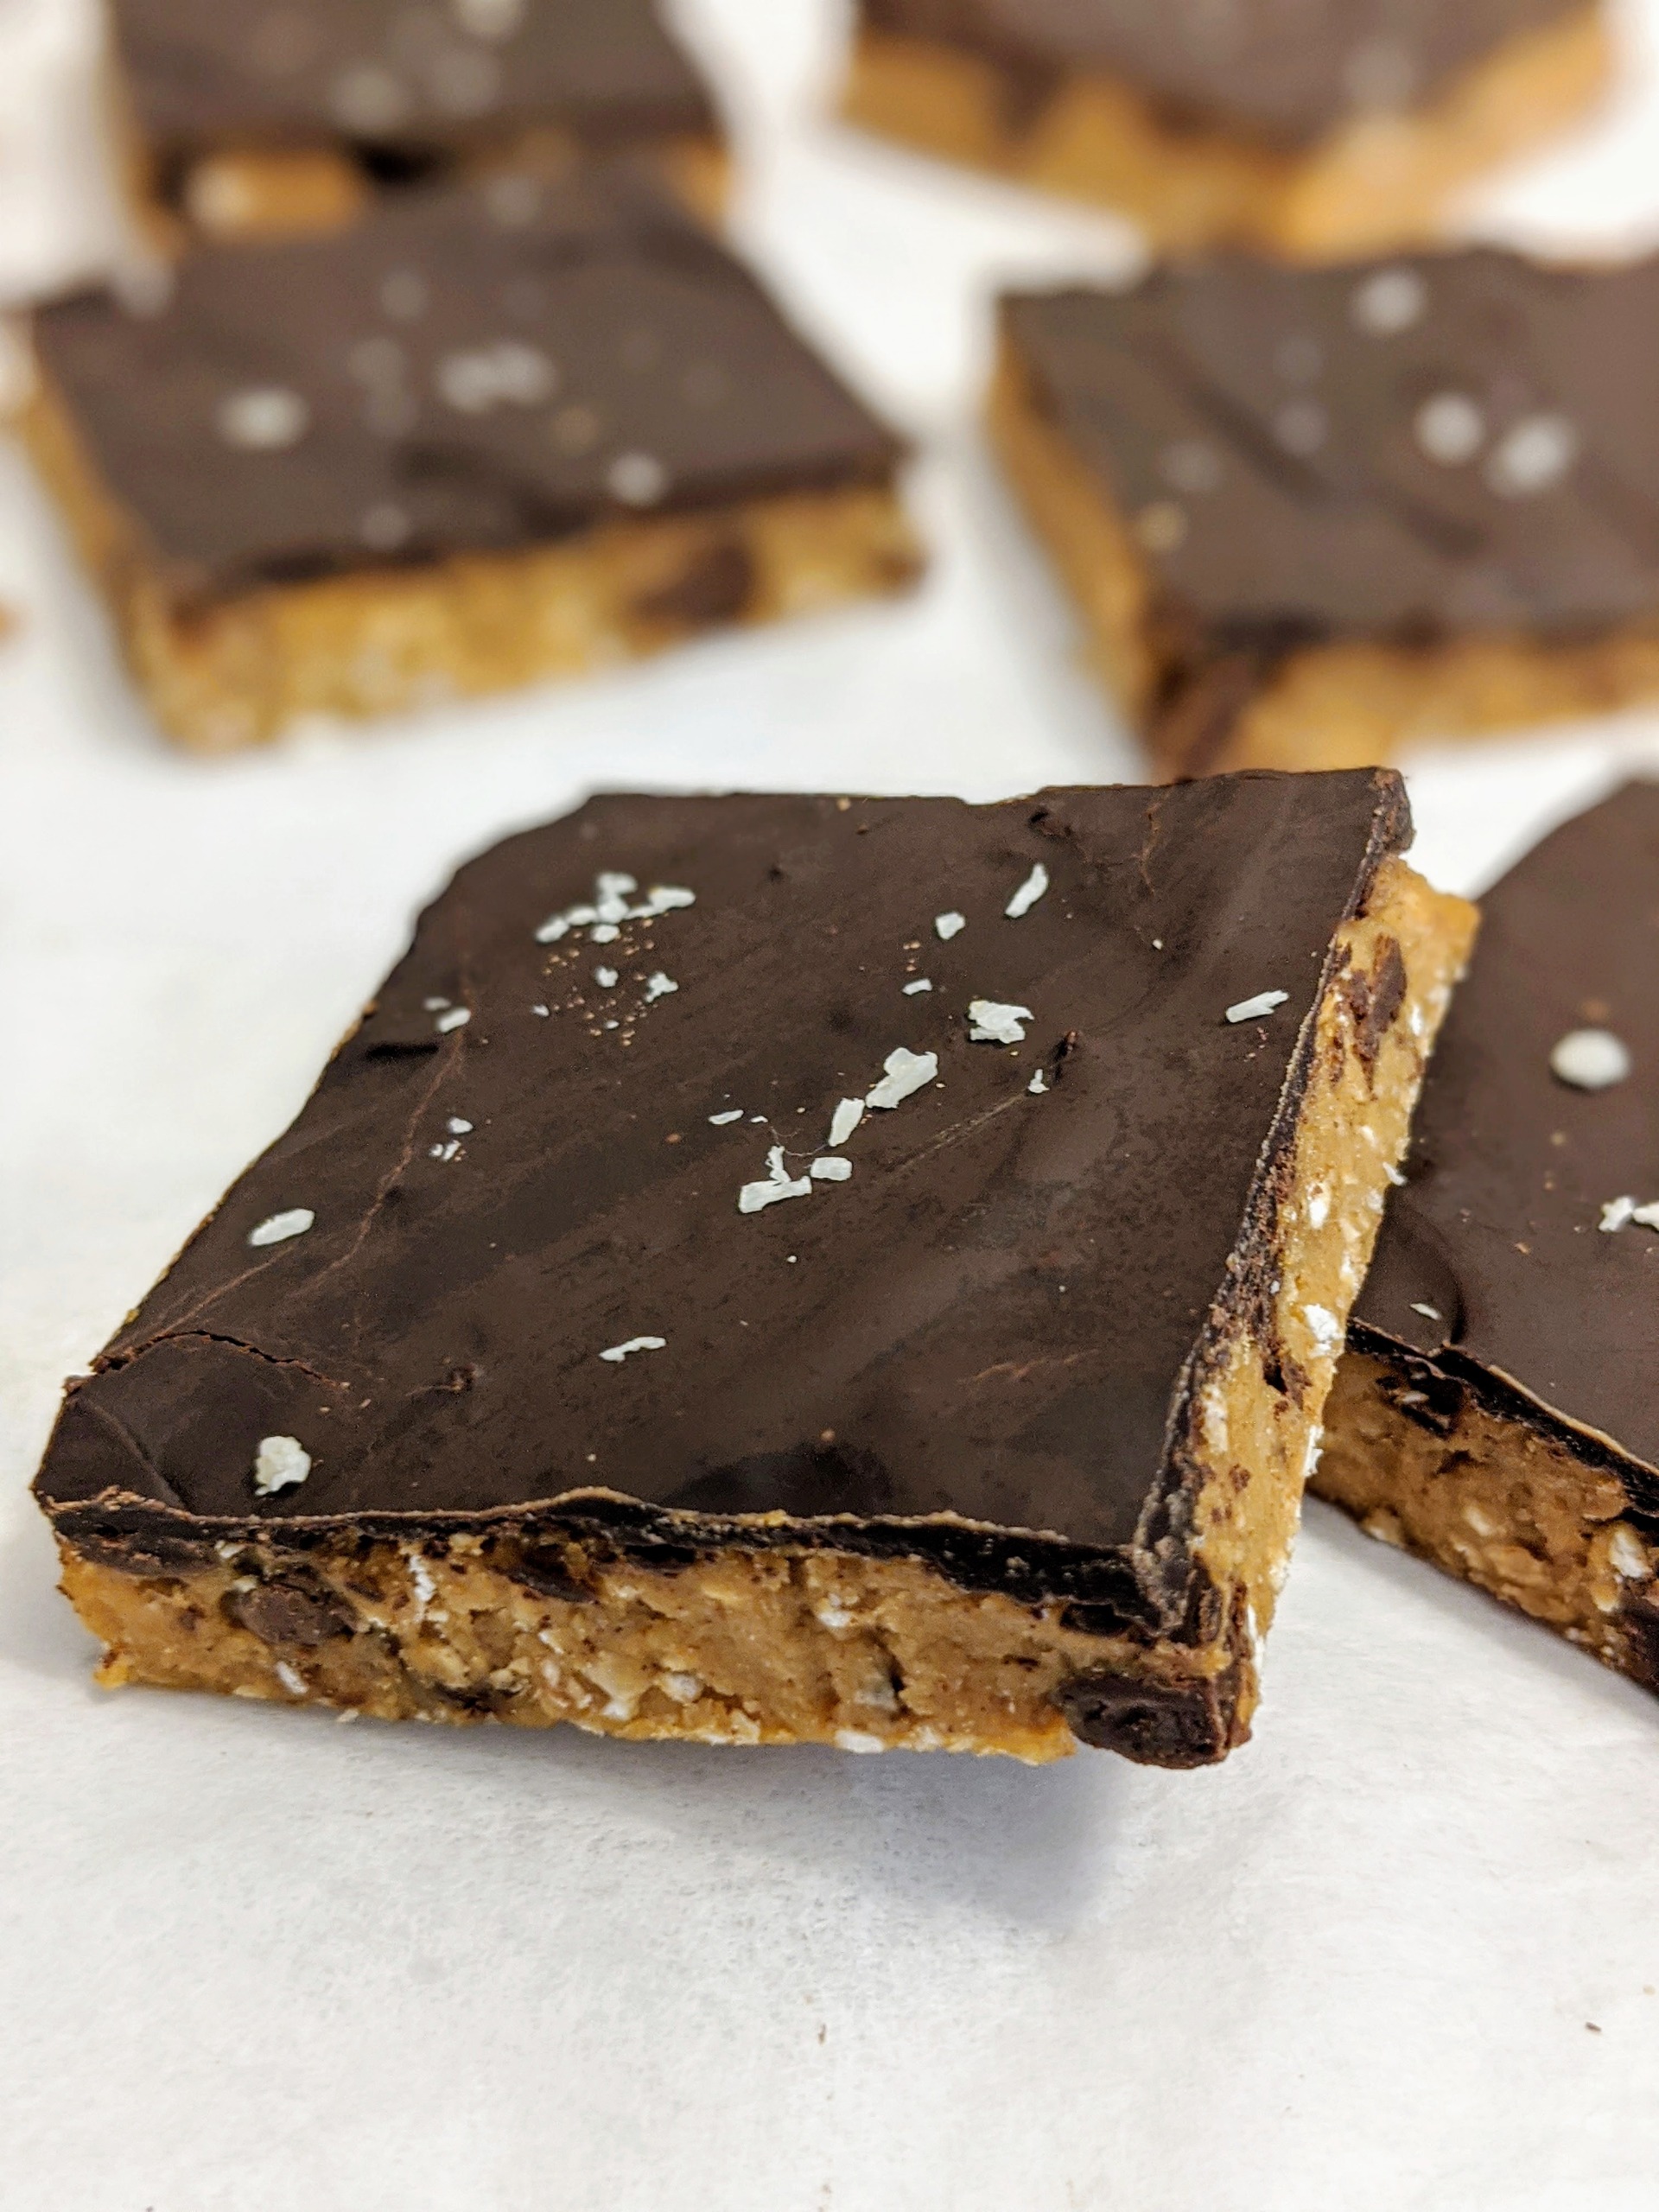 Homemade Take 5 Candy Bars (Vegan & Healthy!) - Purely Kaylie